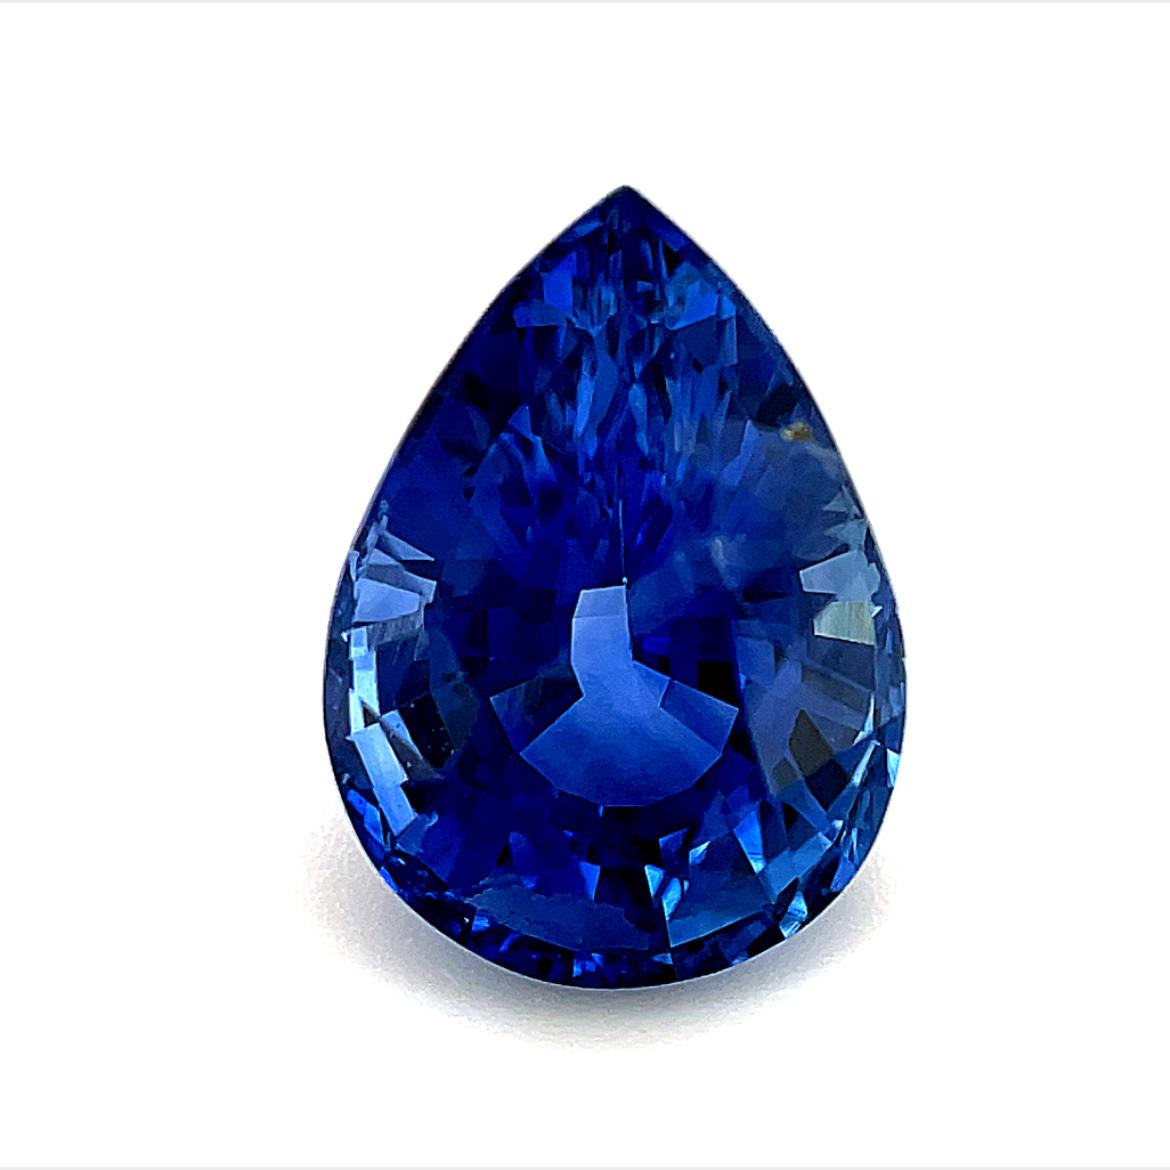 4.18 Carat Unheated Natural Blue Sapphire Pear, Loose Gemstone, GIA Certified For Sale 4